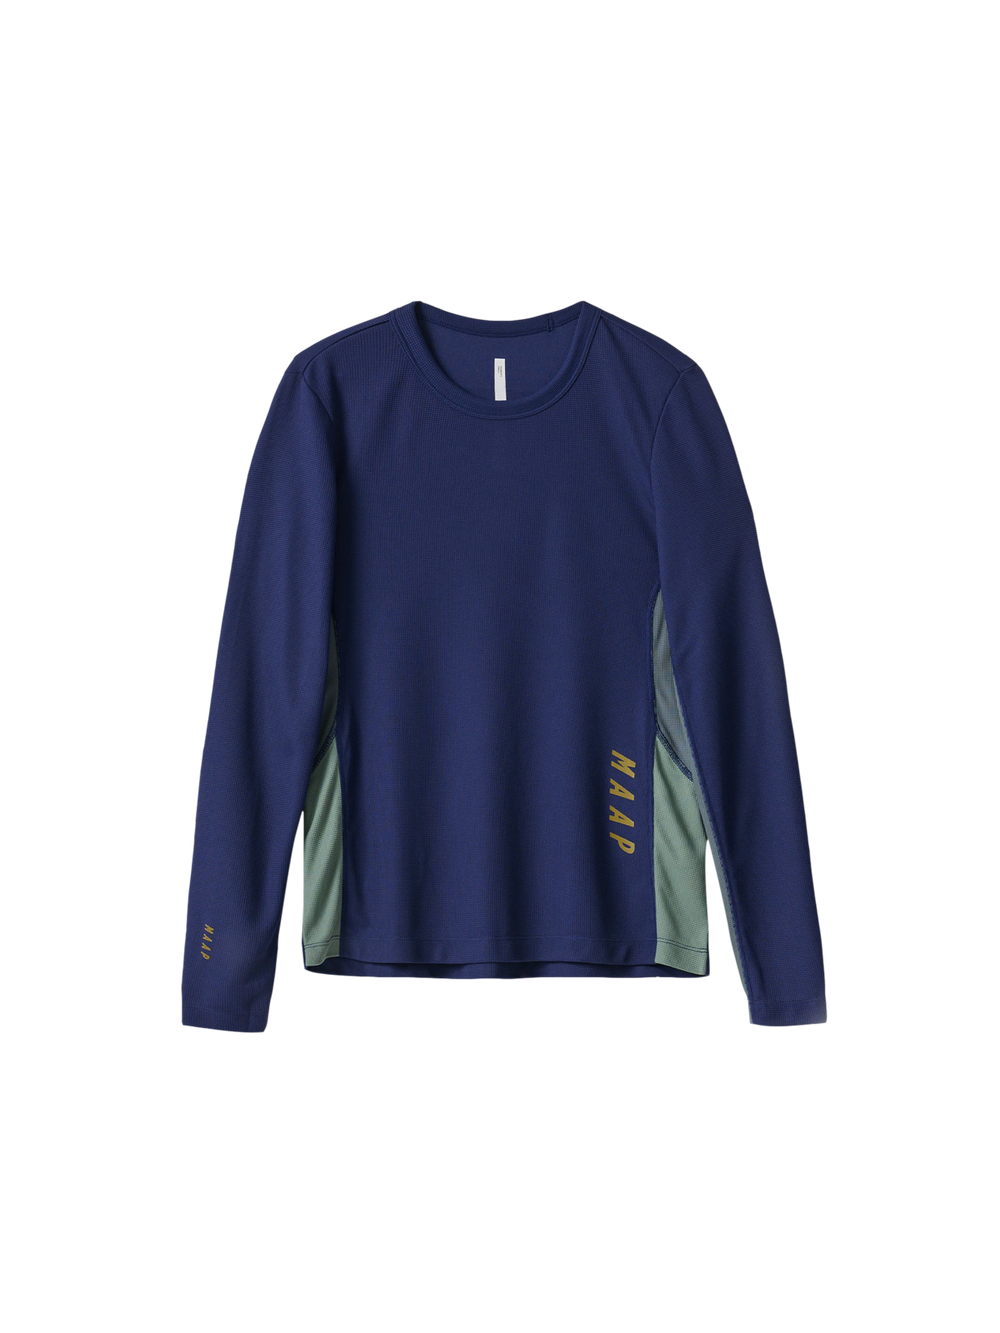 Product Image for Alt_Road Ride LS Tee 3.0